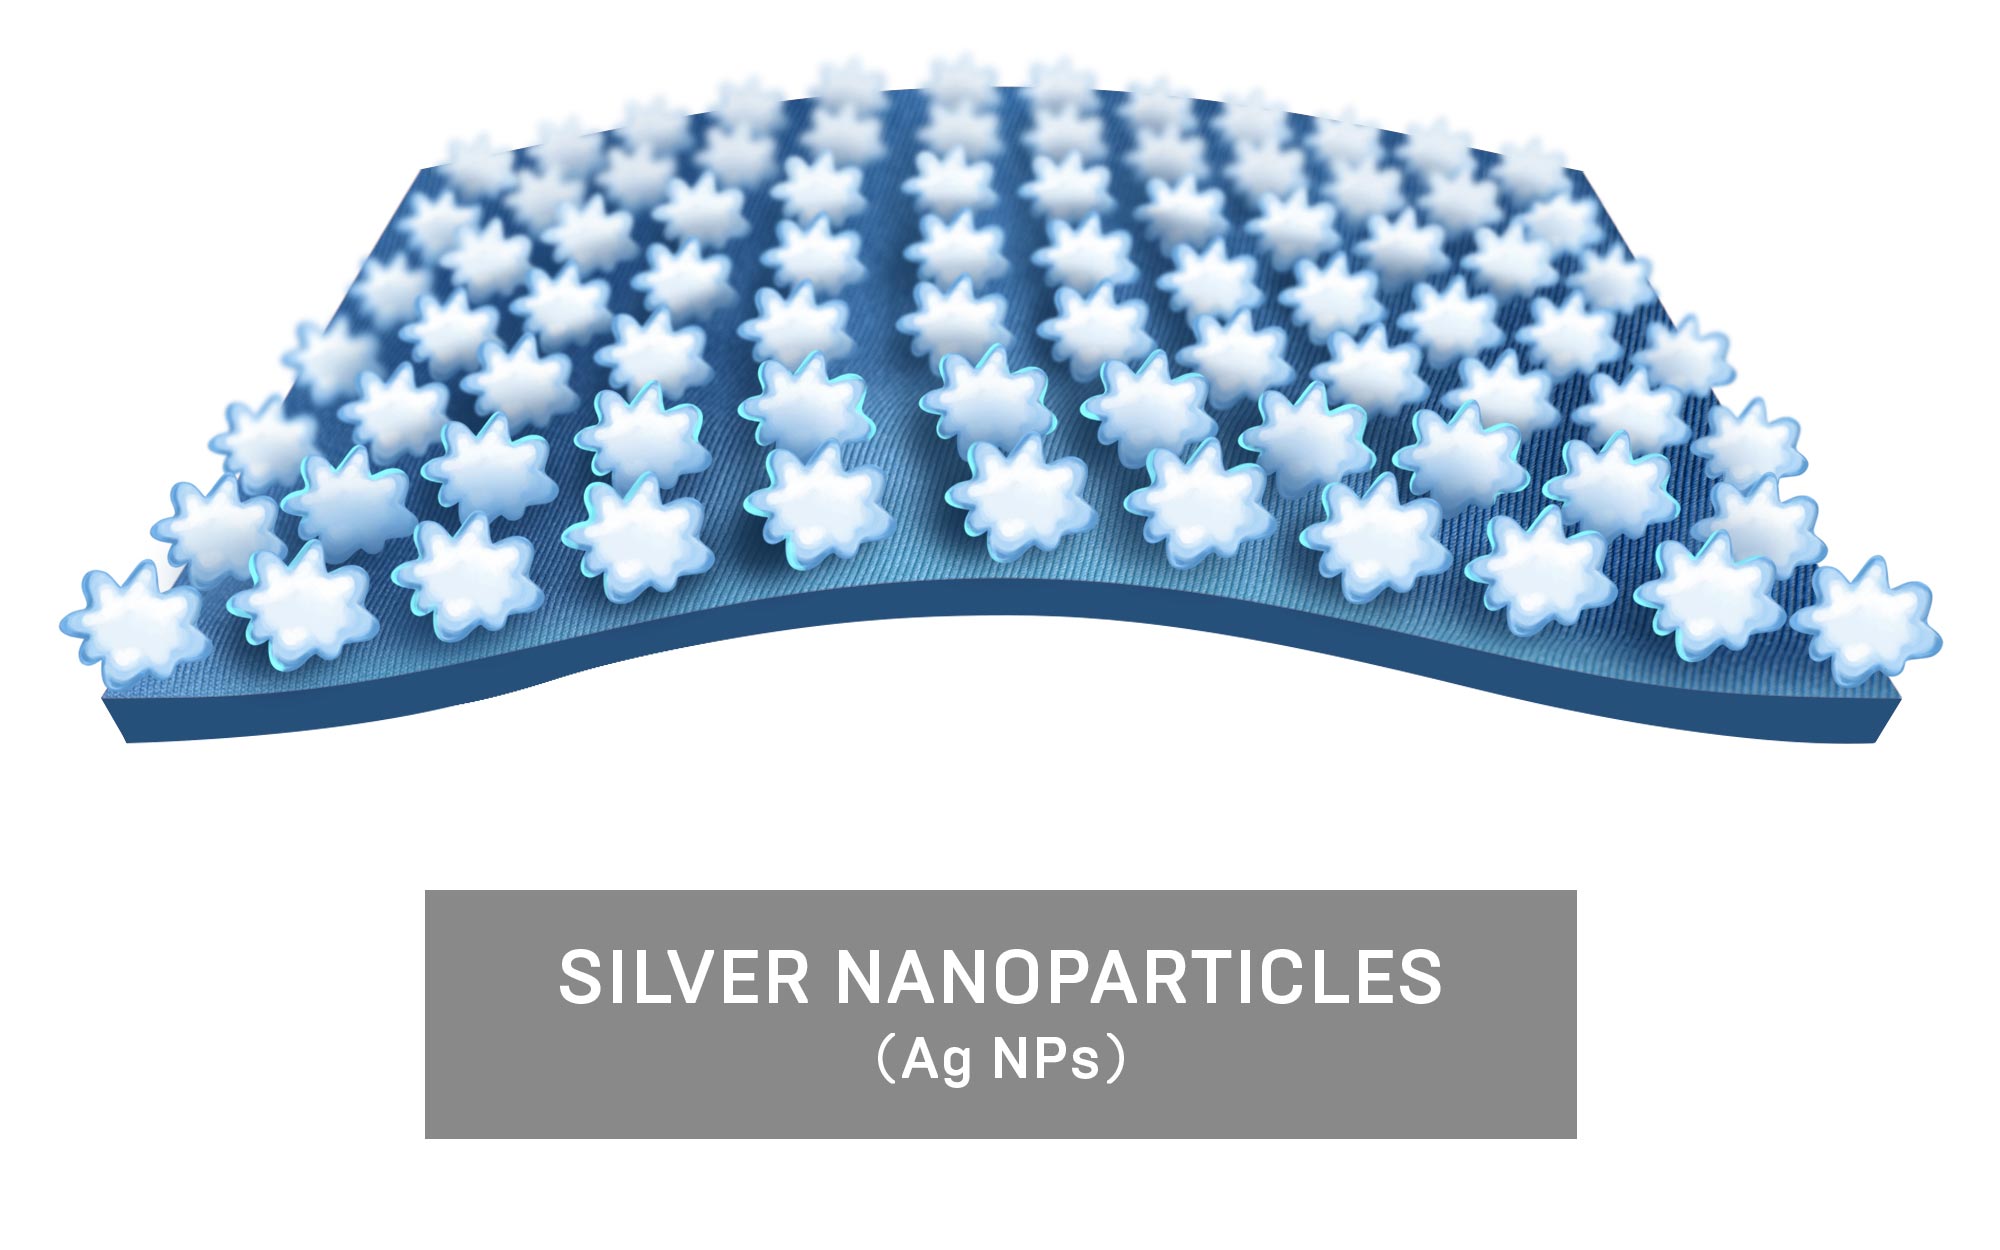 Silver (Ag) antibacterial treatment is achieved by padding textiles with a nanosized Silver colloidal solution.